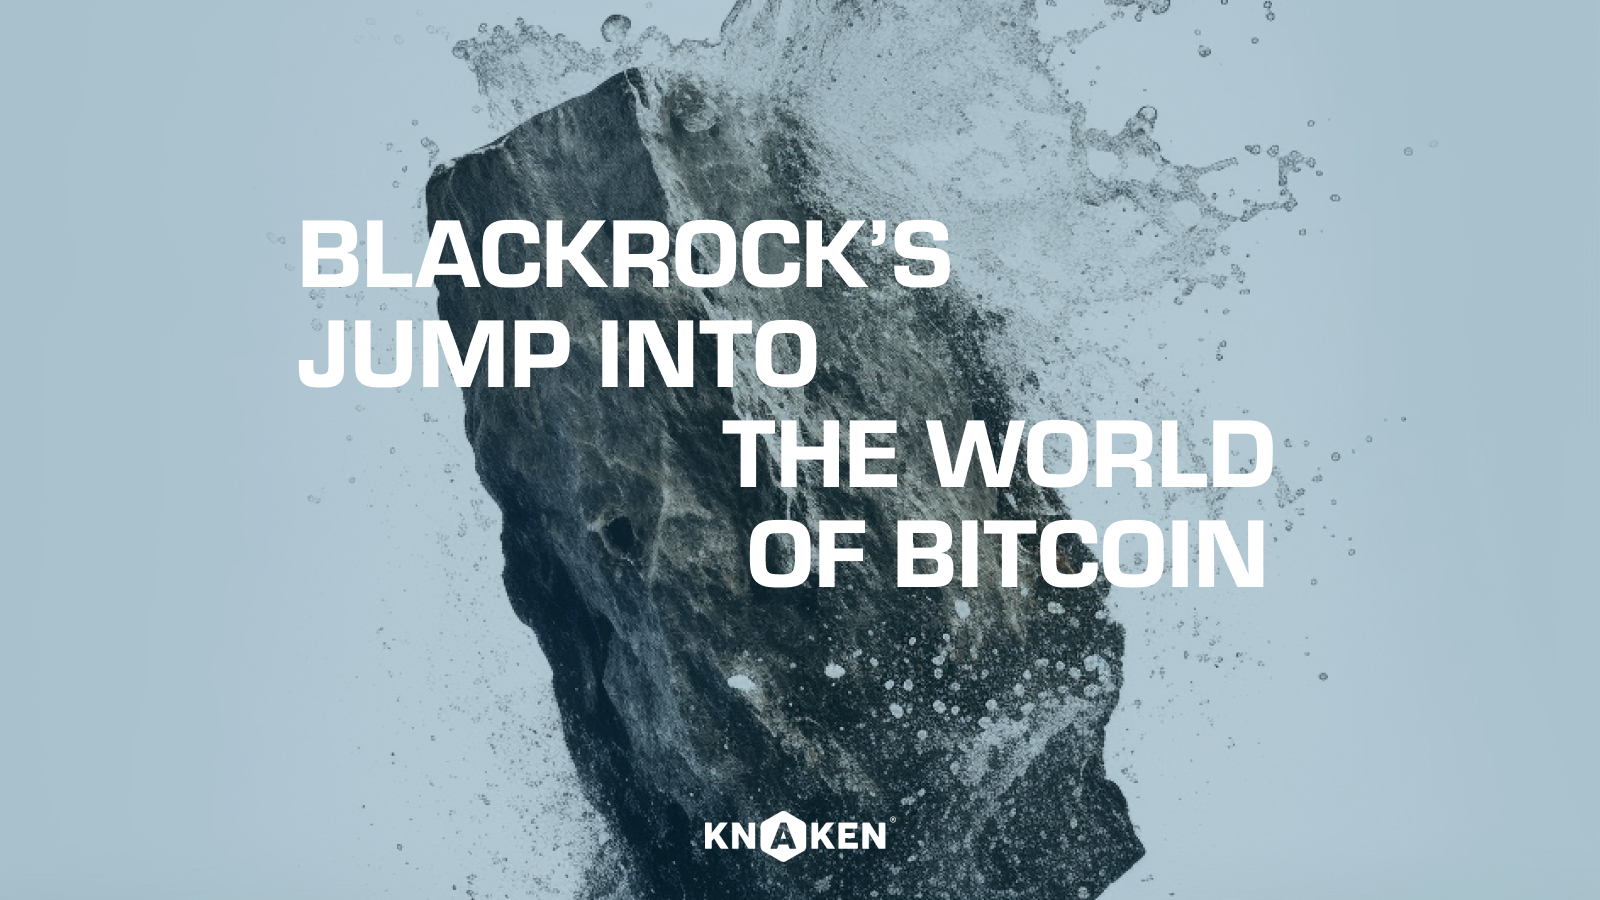 BlackRock’s jump into the World of Bitcoin: What Does It Mean for the Crypto Market?